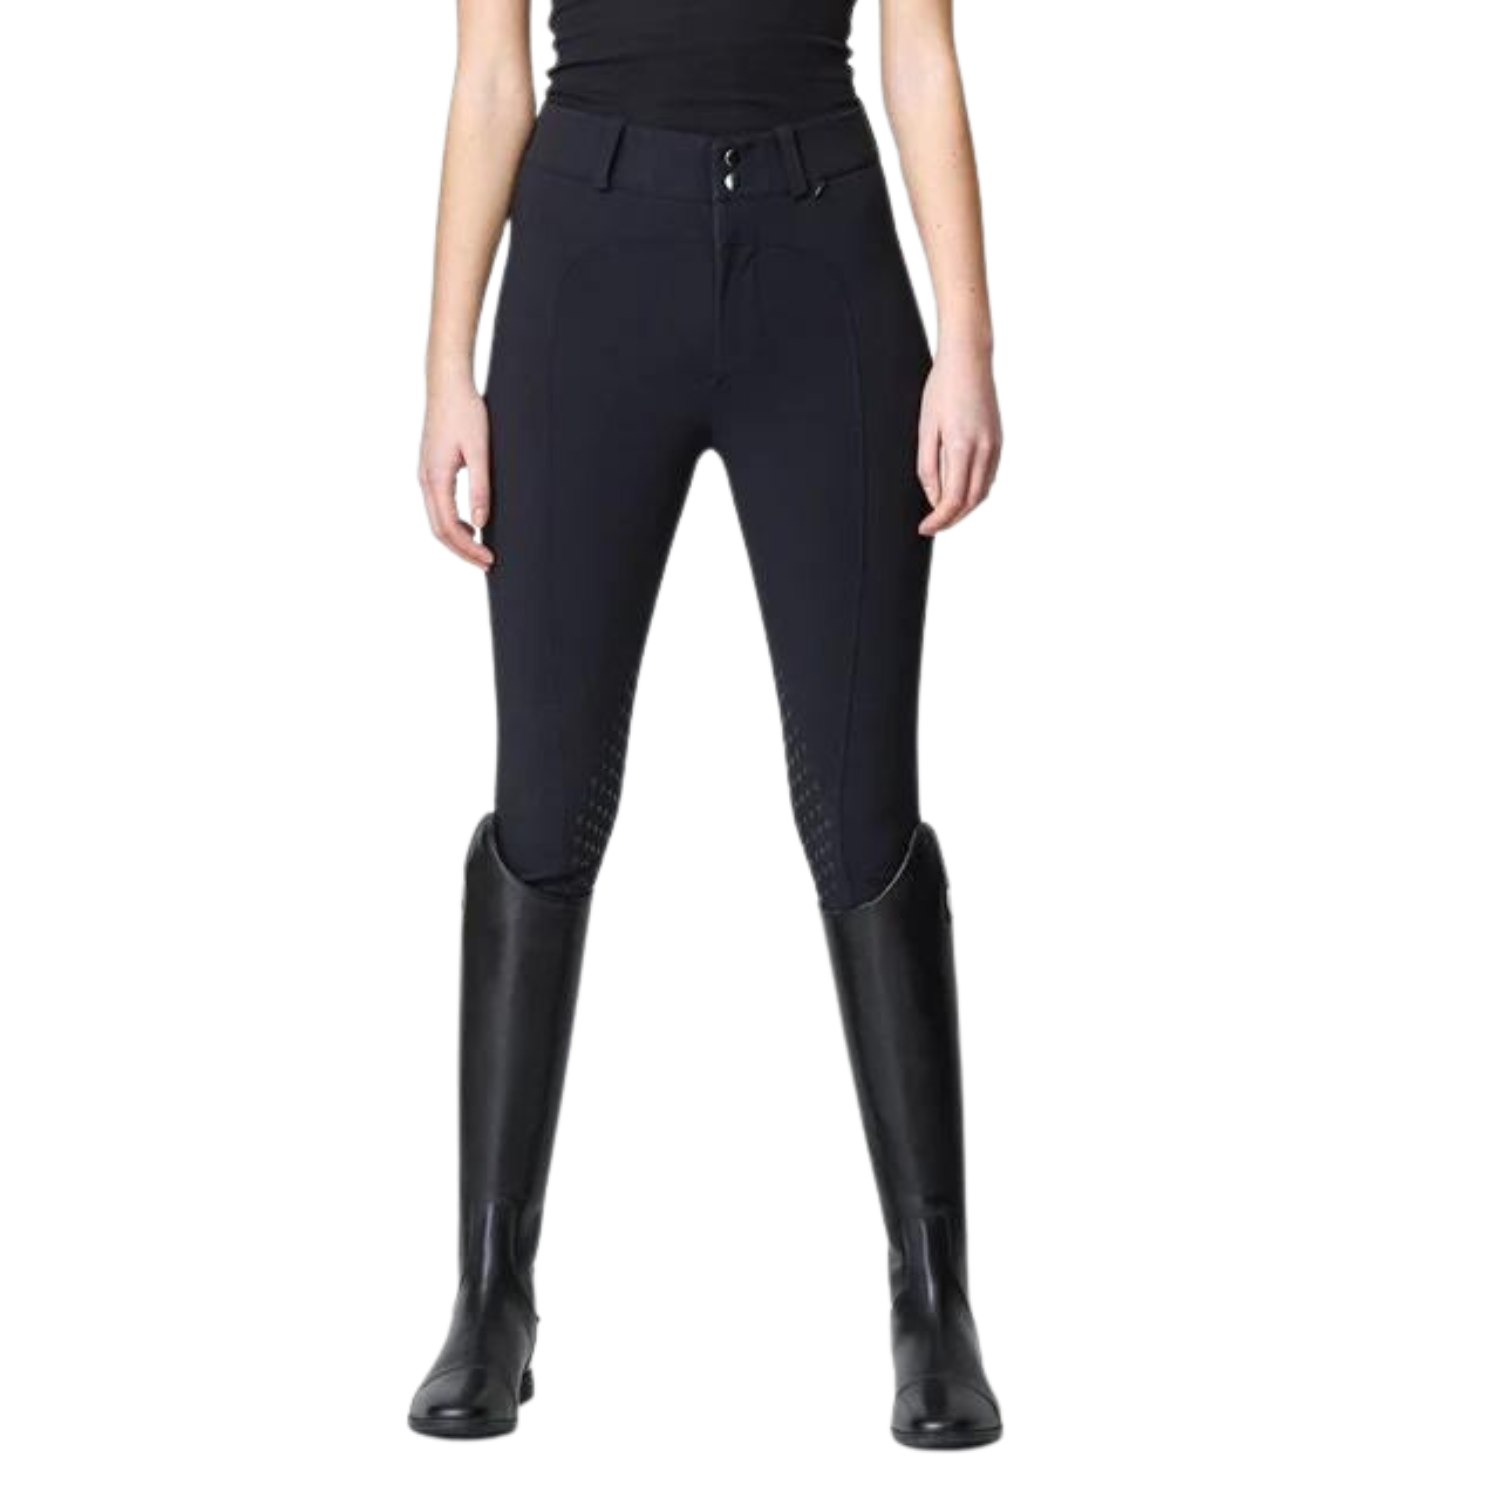 Ladies Extra High-Rise Compression Knee Grip Breeches - Black (LAST ONE - X-Small - IT38 - UK6)